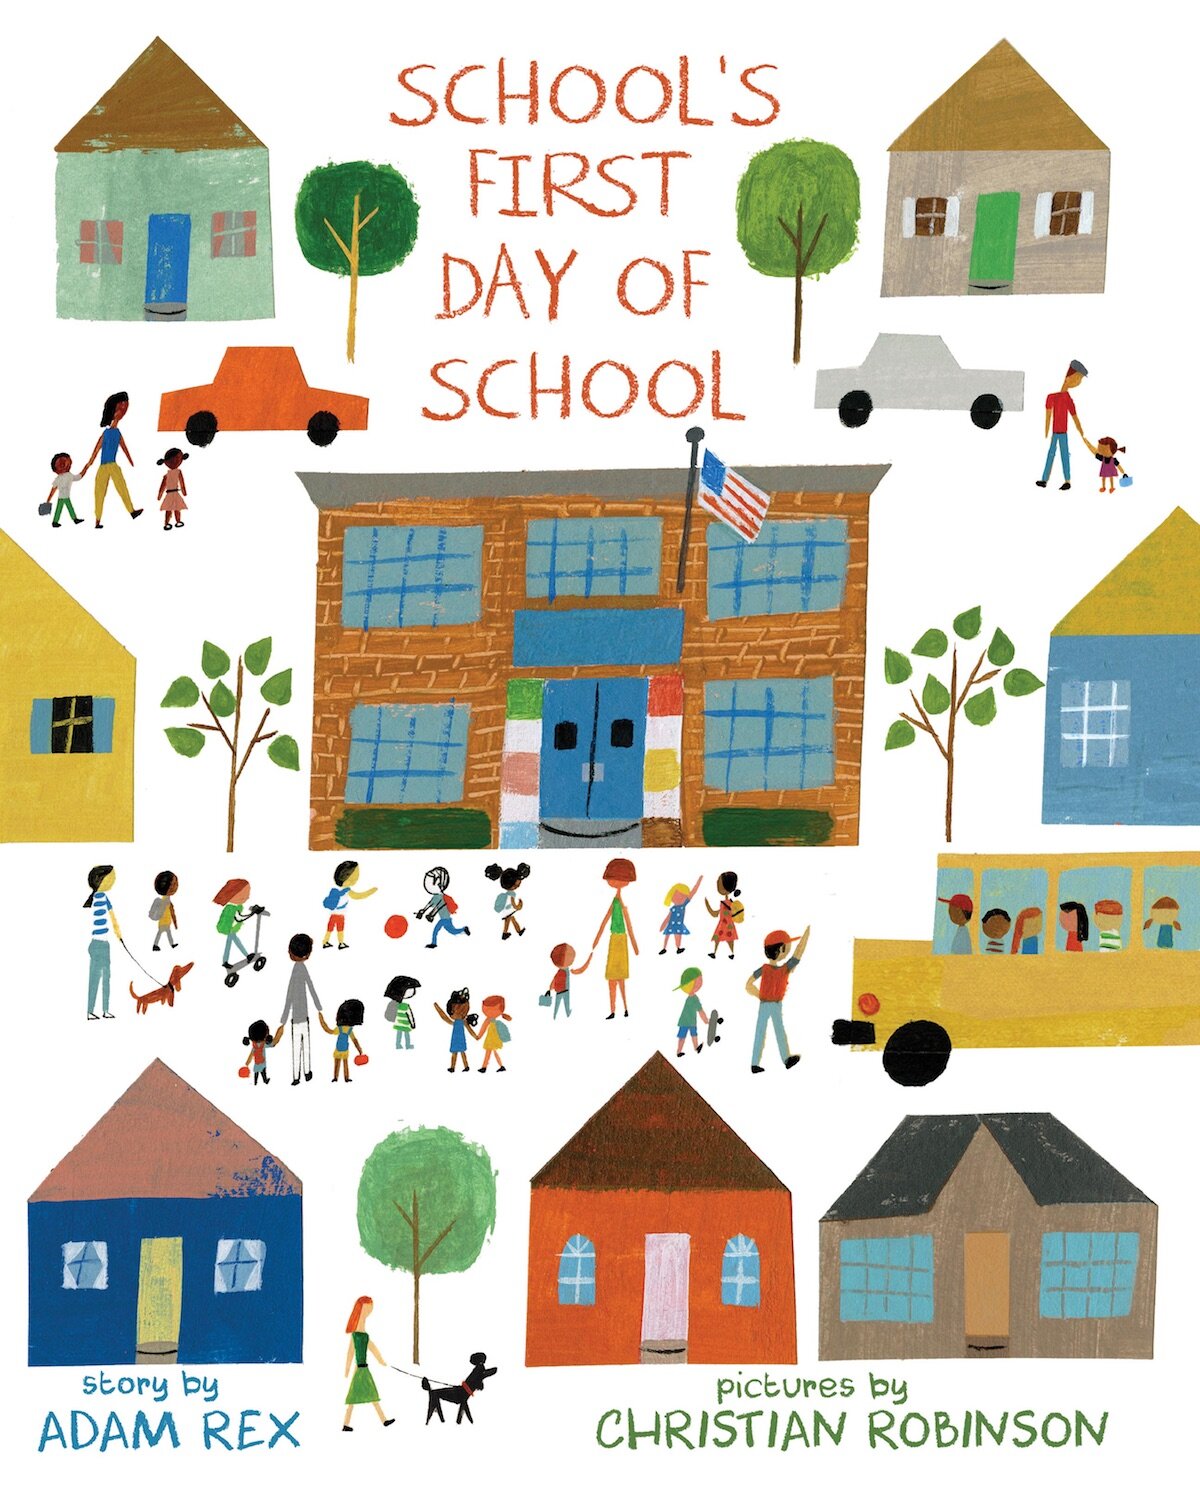 Schoolsfirstday cover small.jpg